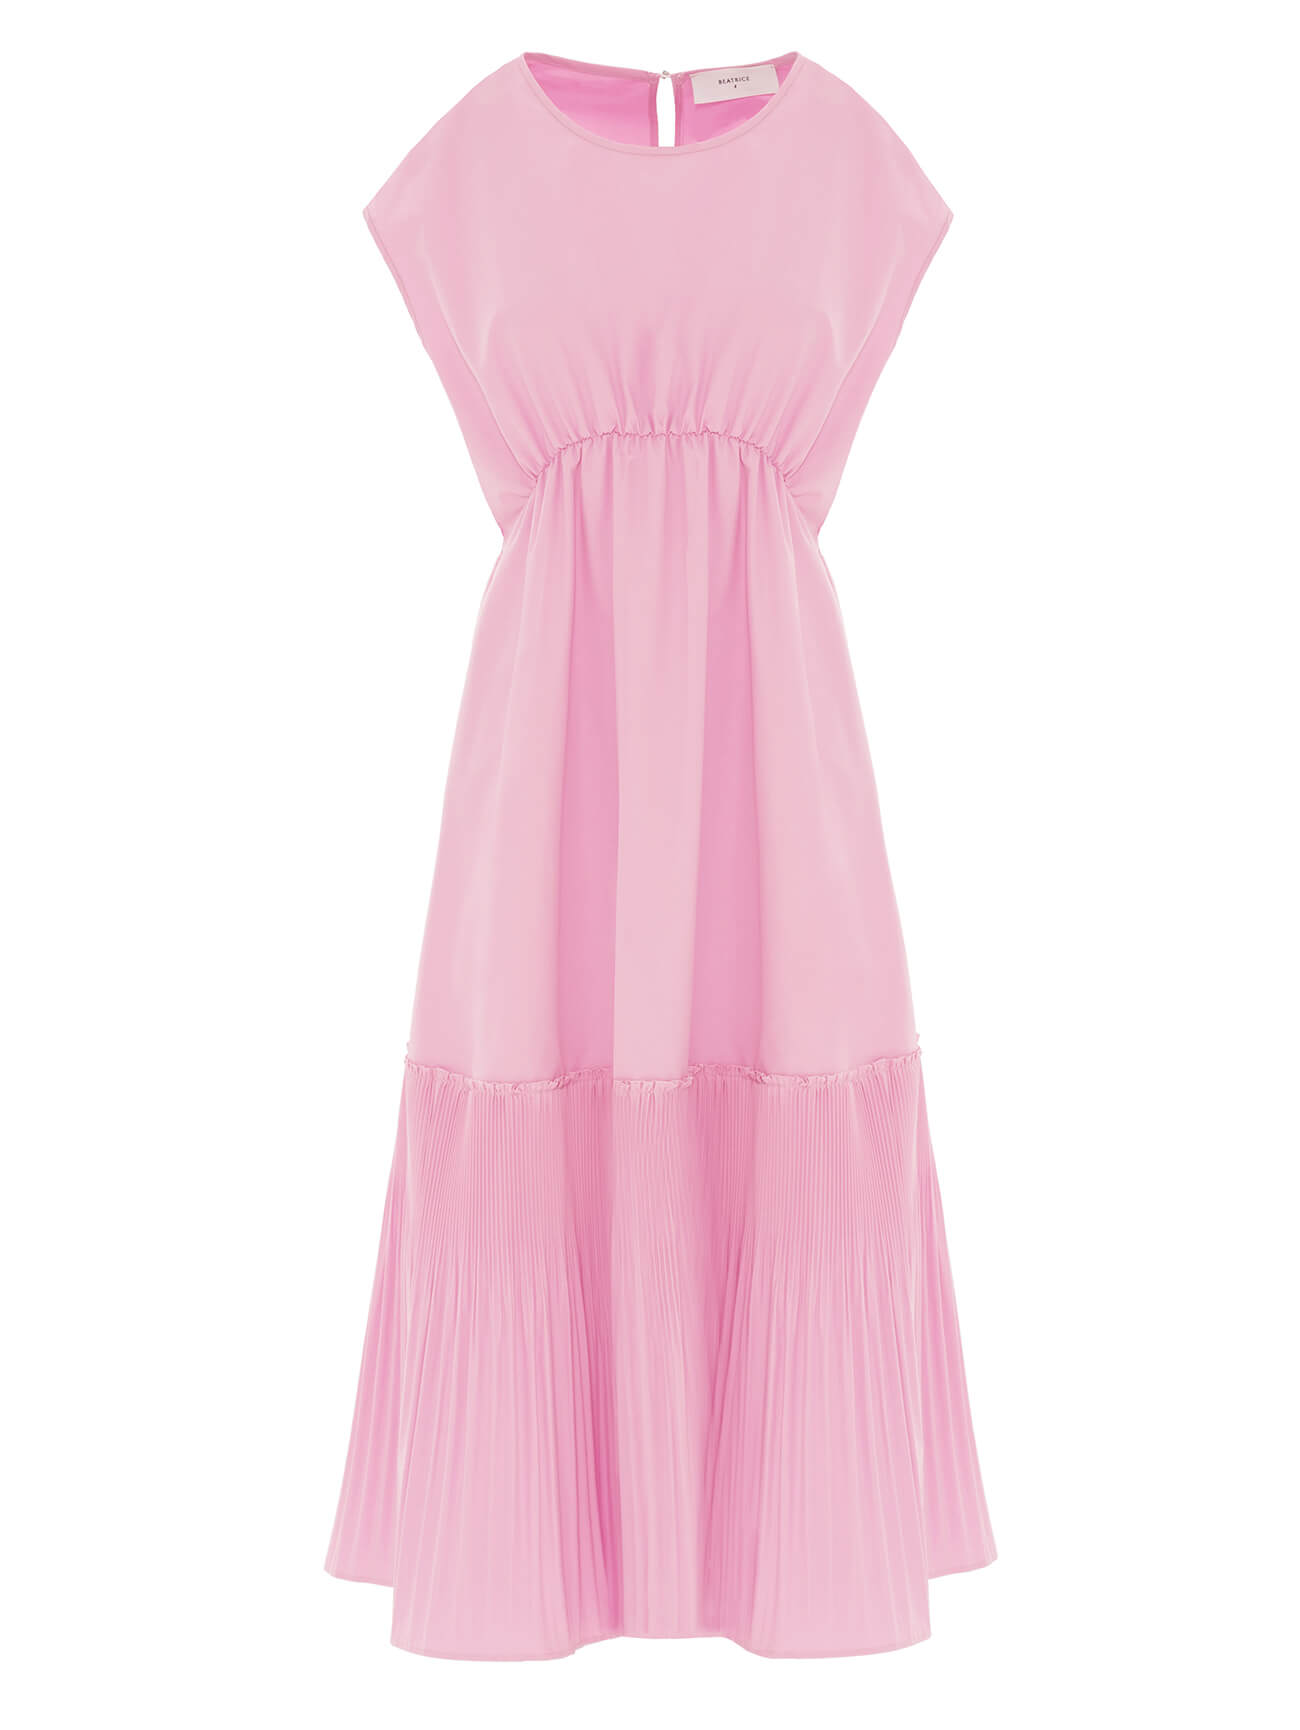 pink dress with ruffles on the bottom